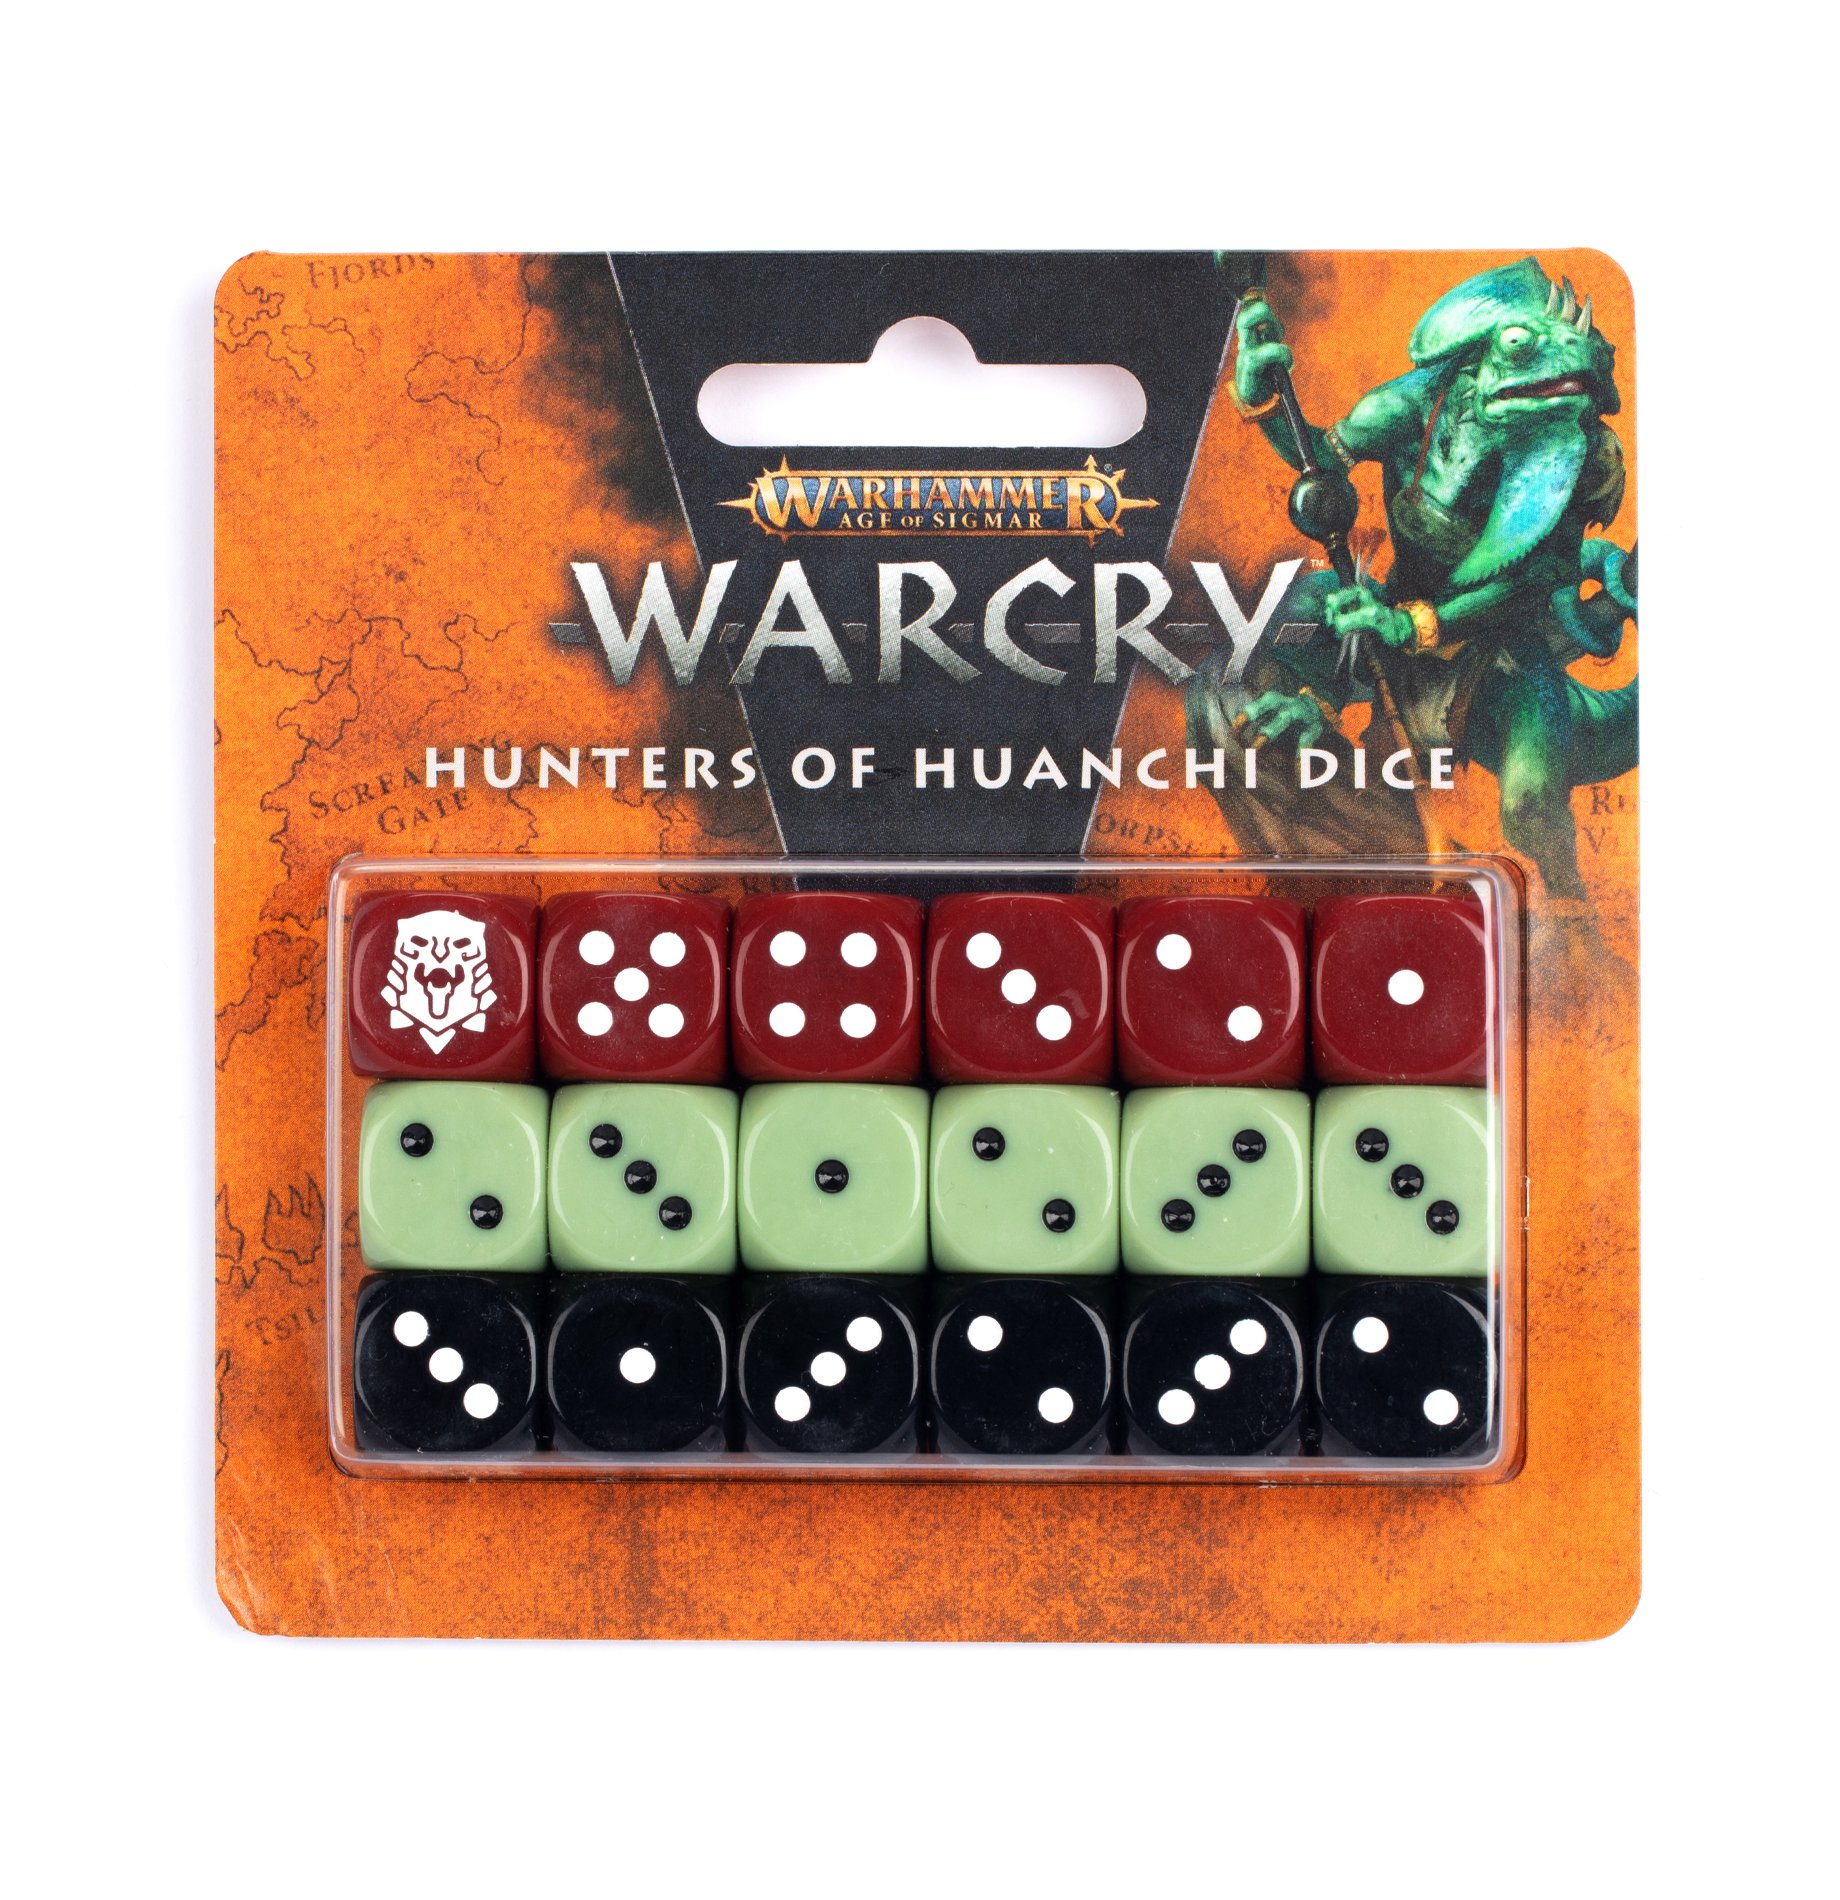 Warhammer Warcry: Hunters Of Huanchi Dice